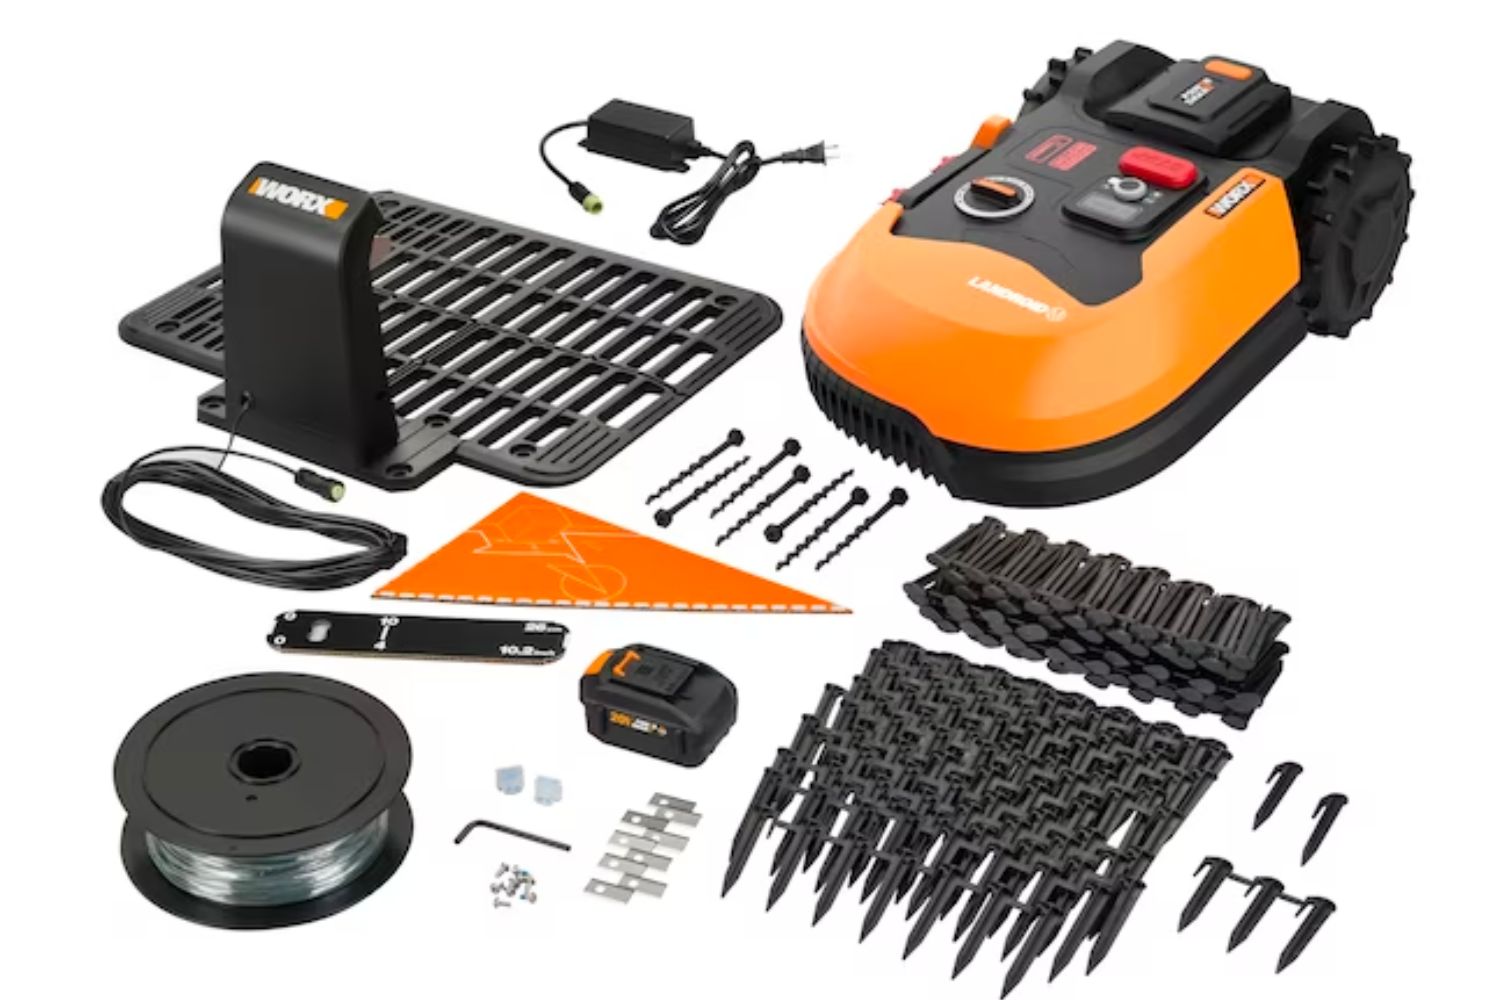 The Worx Landroid M robotic lawn mower pictured with all its accessories